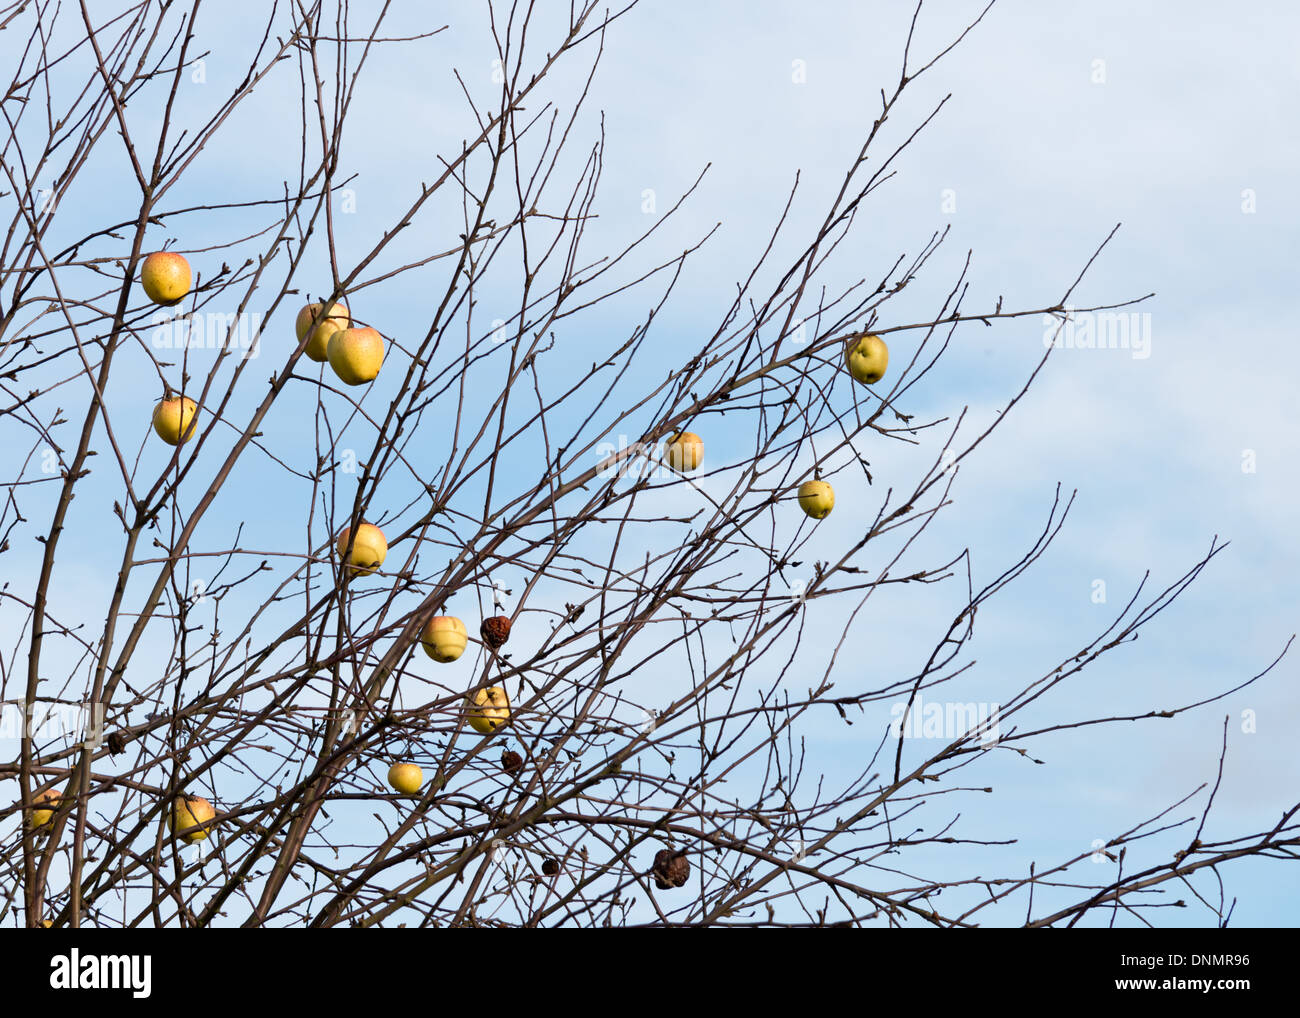 apples in the winter with a dry tree Stock Photo